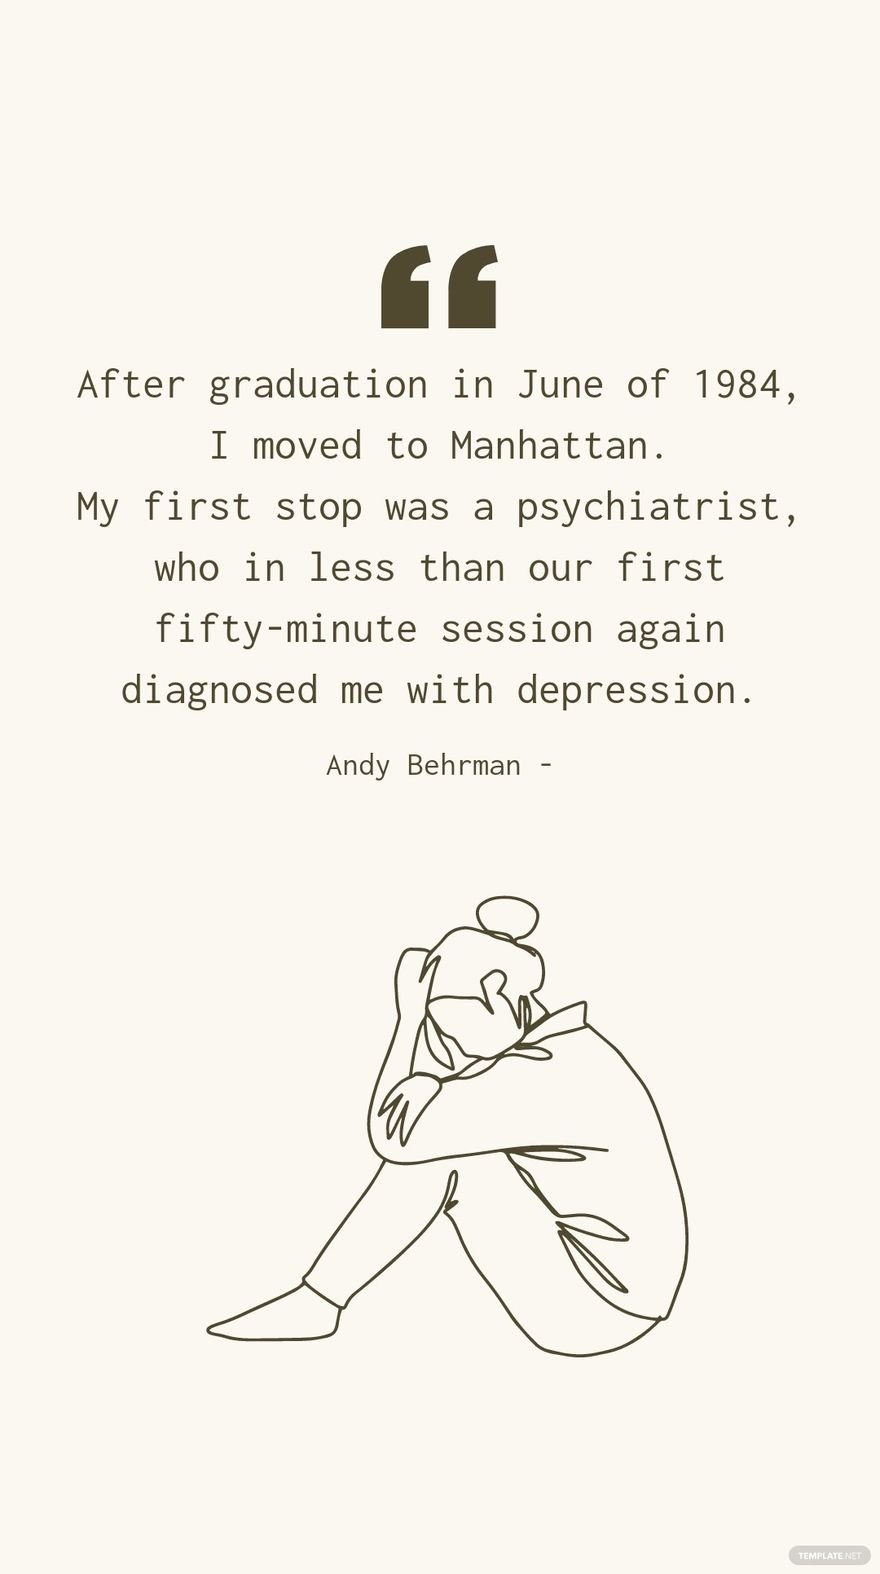 Andy Behrman - After graduation in June of 1984, I moved to Manhattan. My first stop was a psychiatrist, who in less than our first fifty-minute session again diagnosed me with depression.